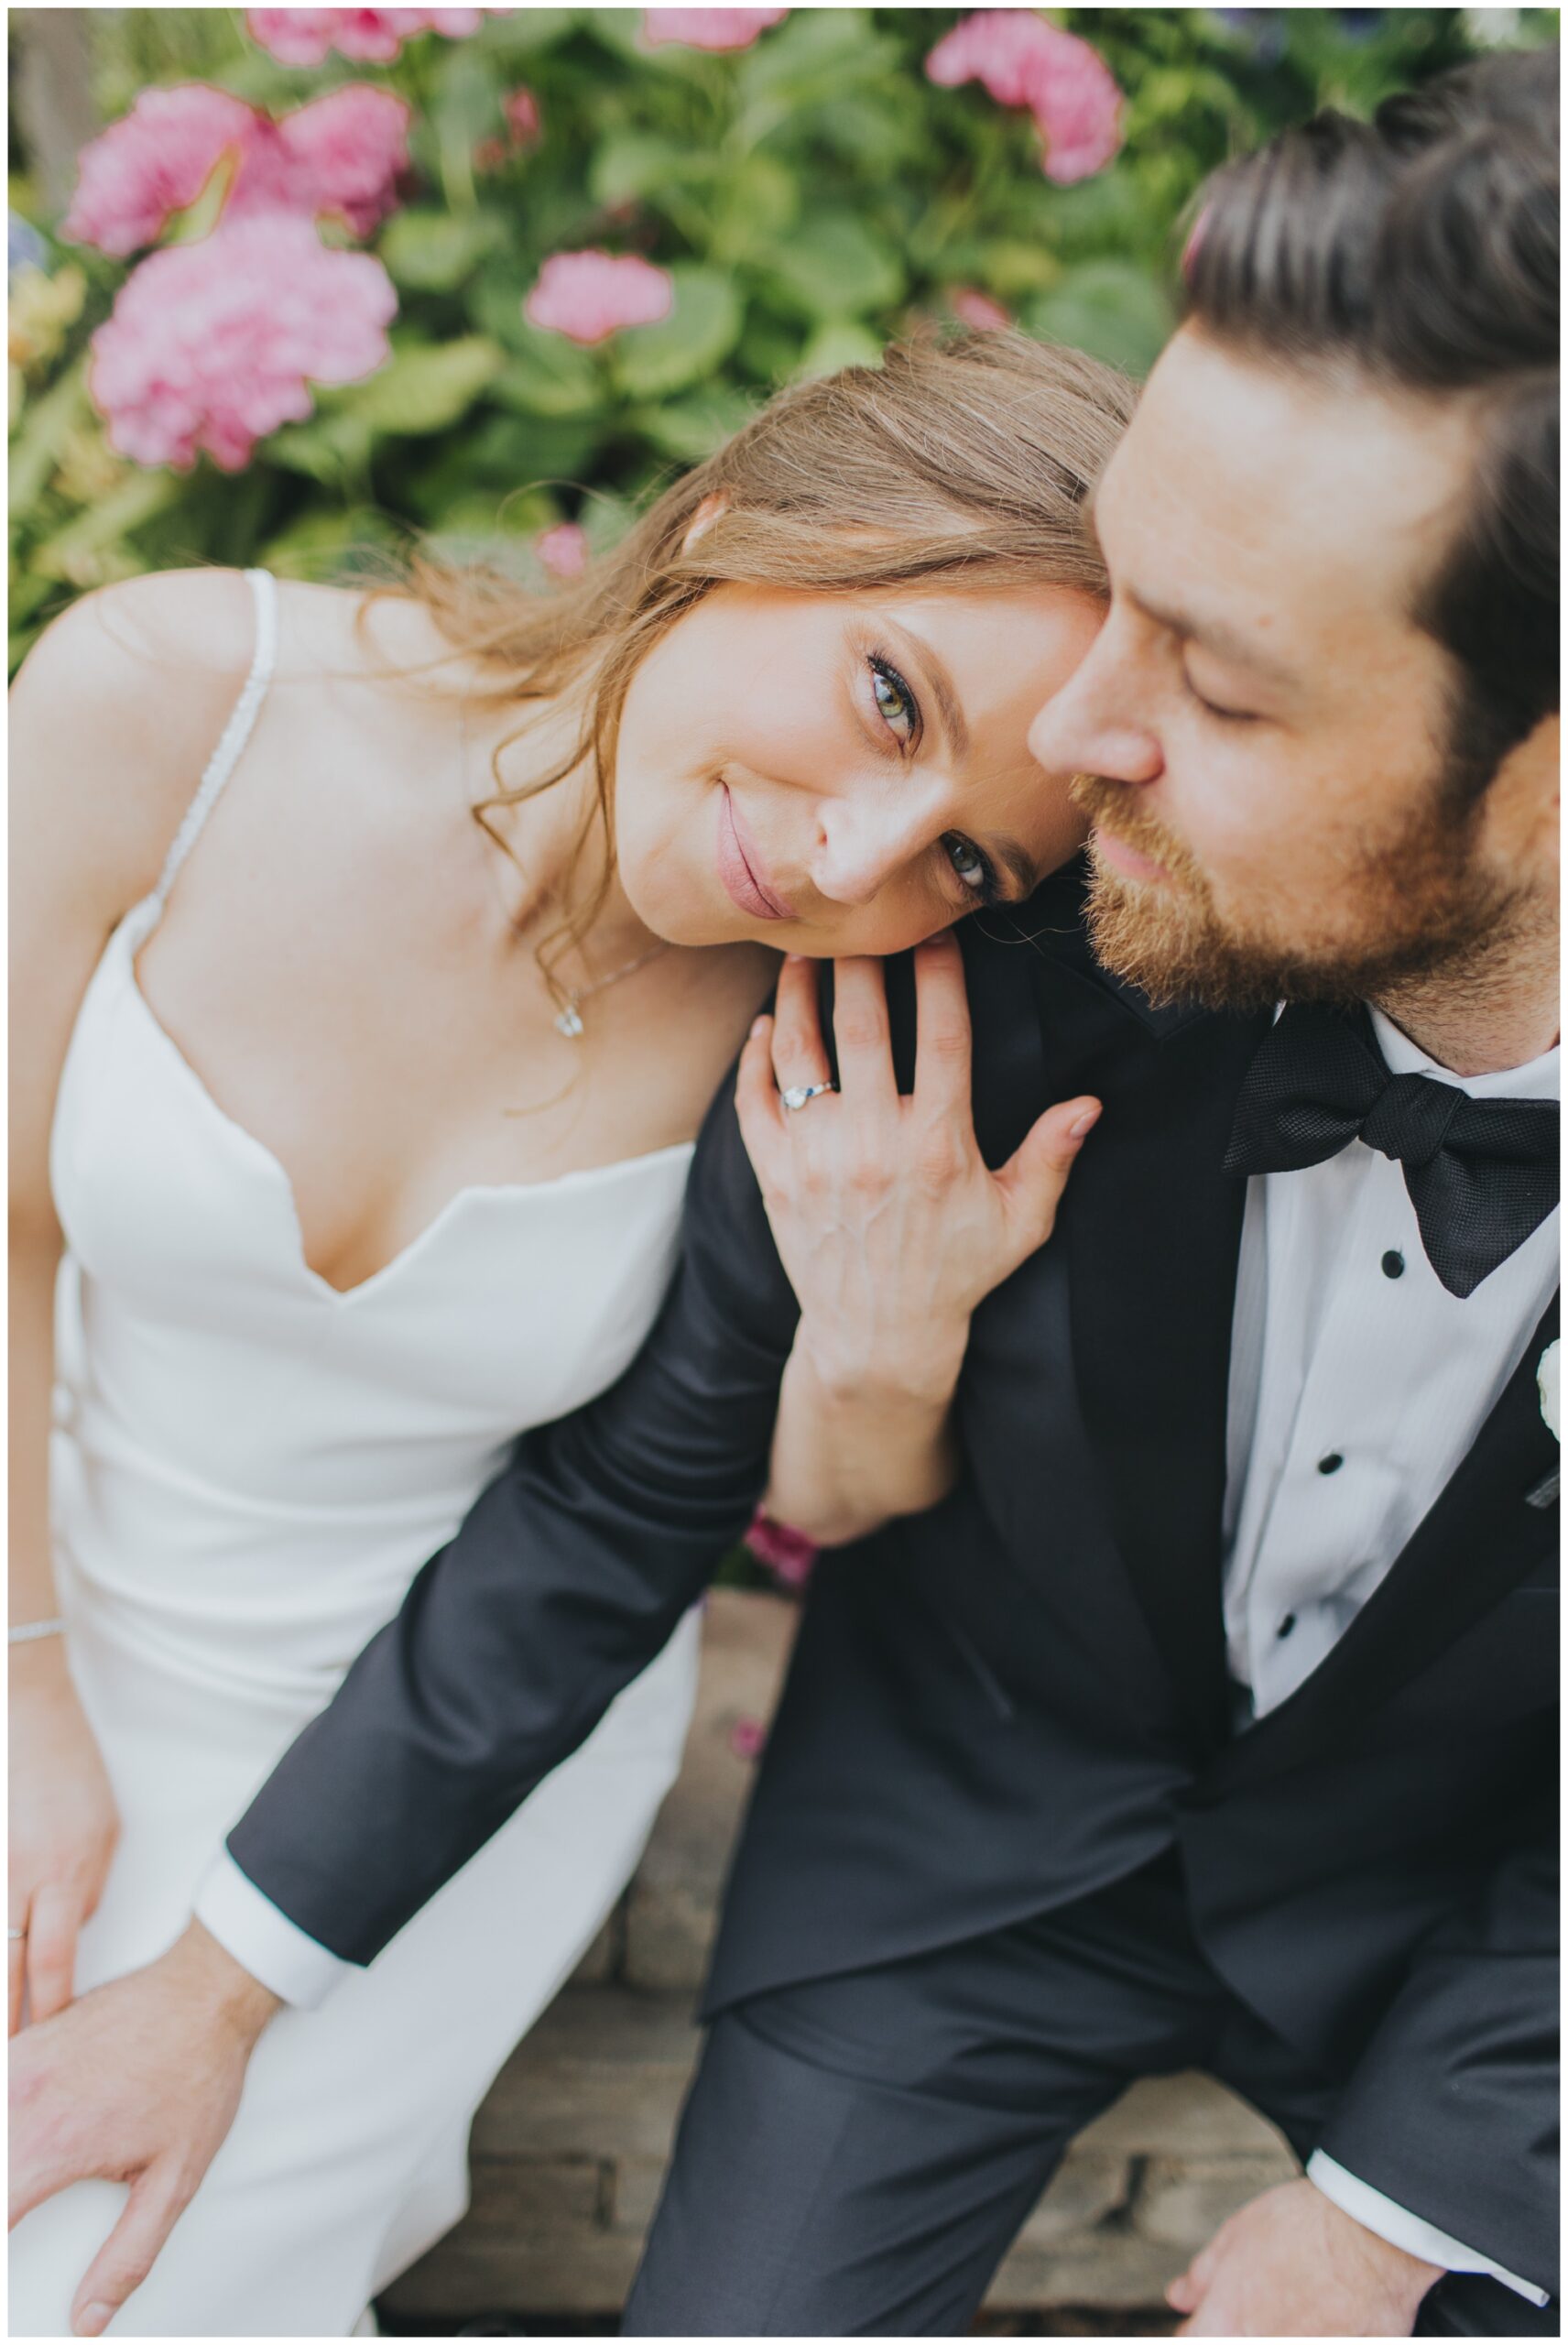 couples portraits; wedding portraits at Garfield Conservatory Chicago